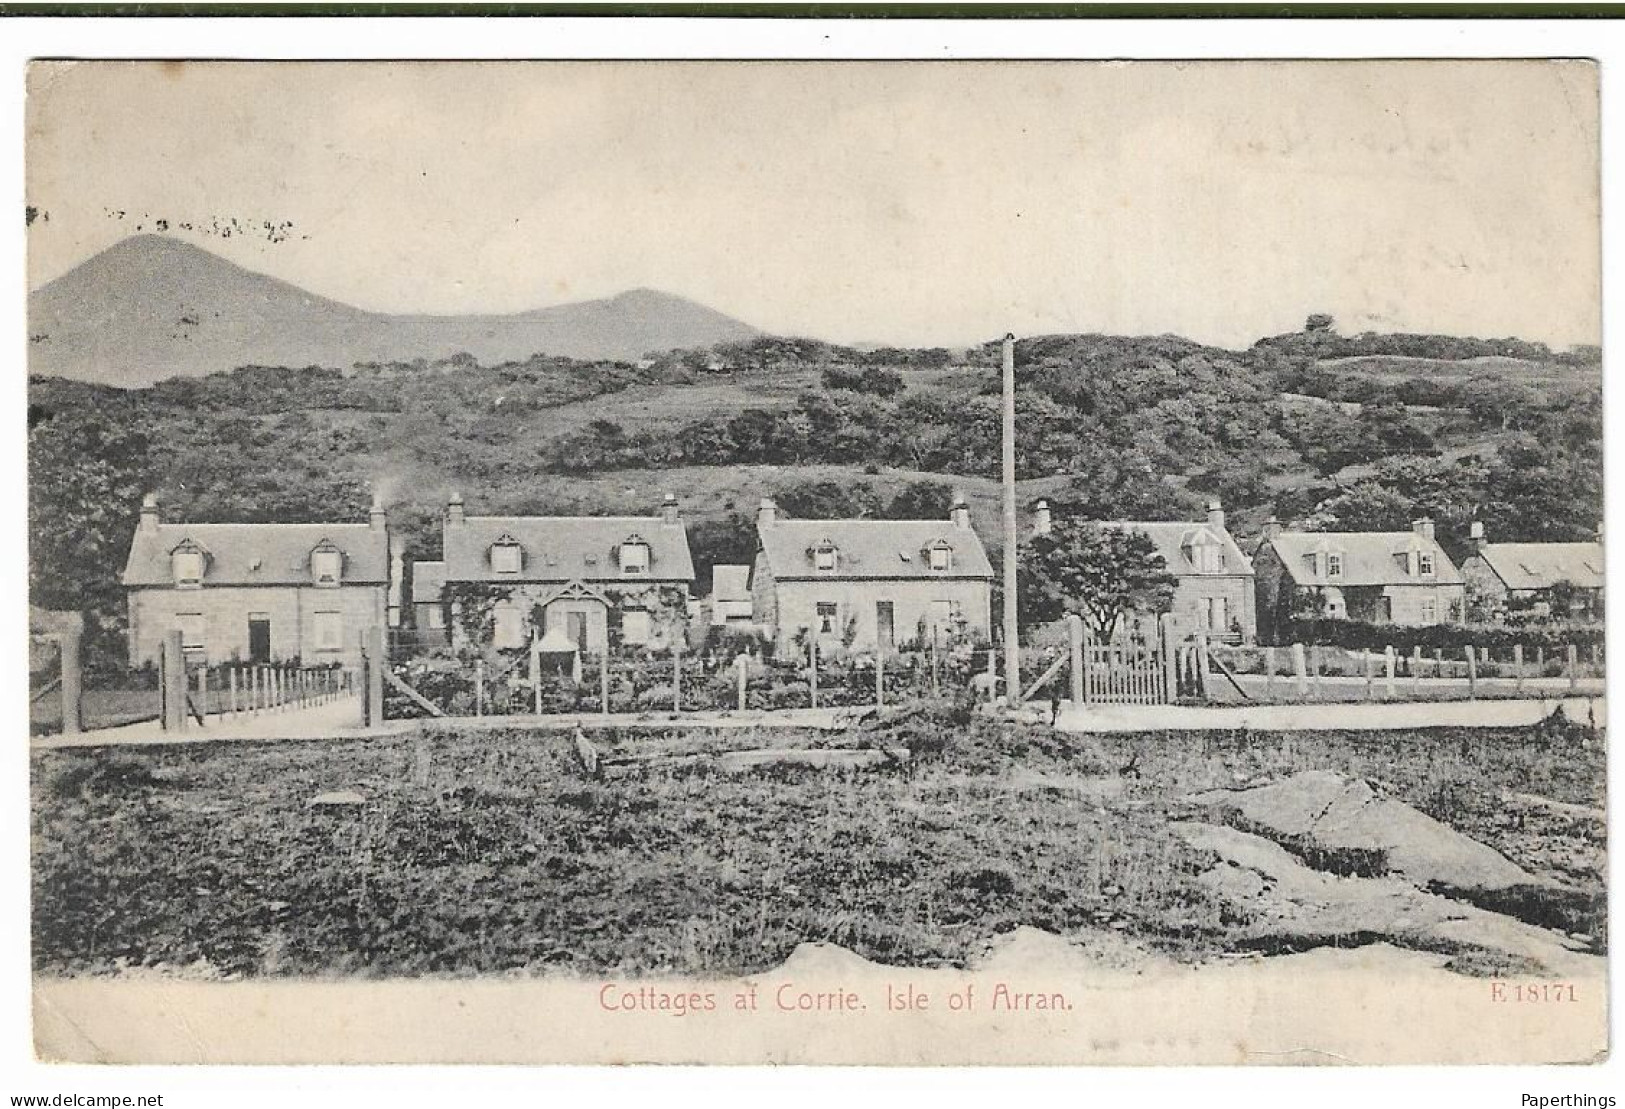 Postcard, Scotland, Firth Of Clyde, Isle Of Arran, Cottages At Corrie, Road, Street, Landscape - Ayrshire